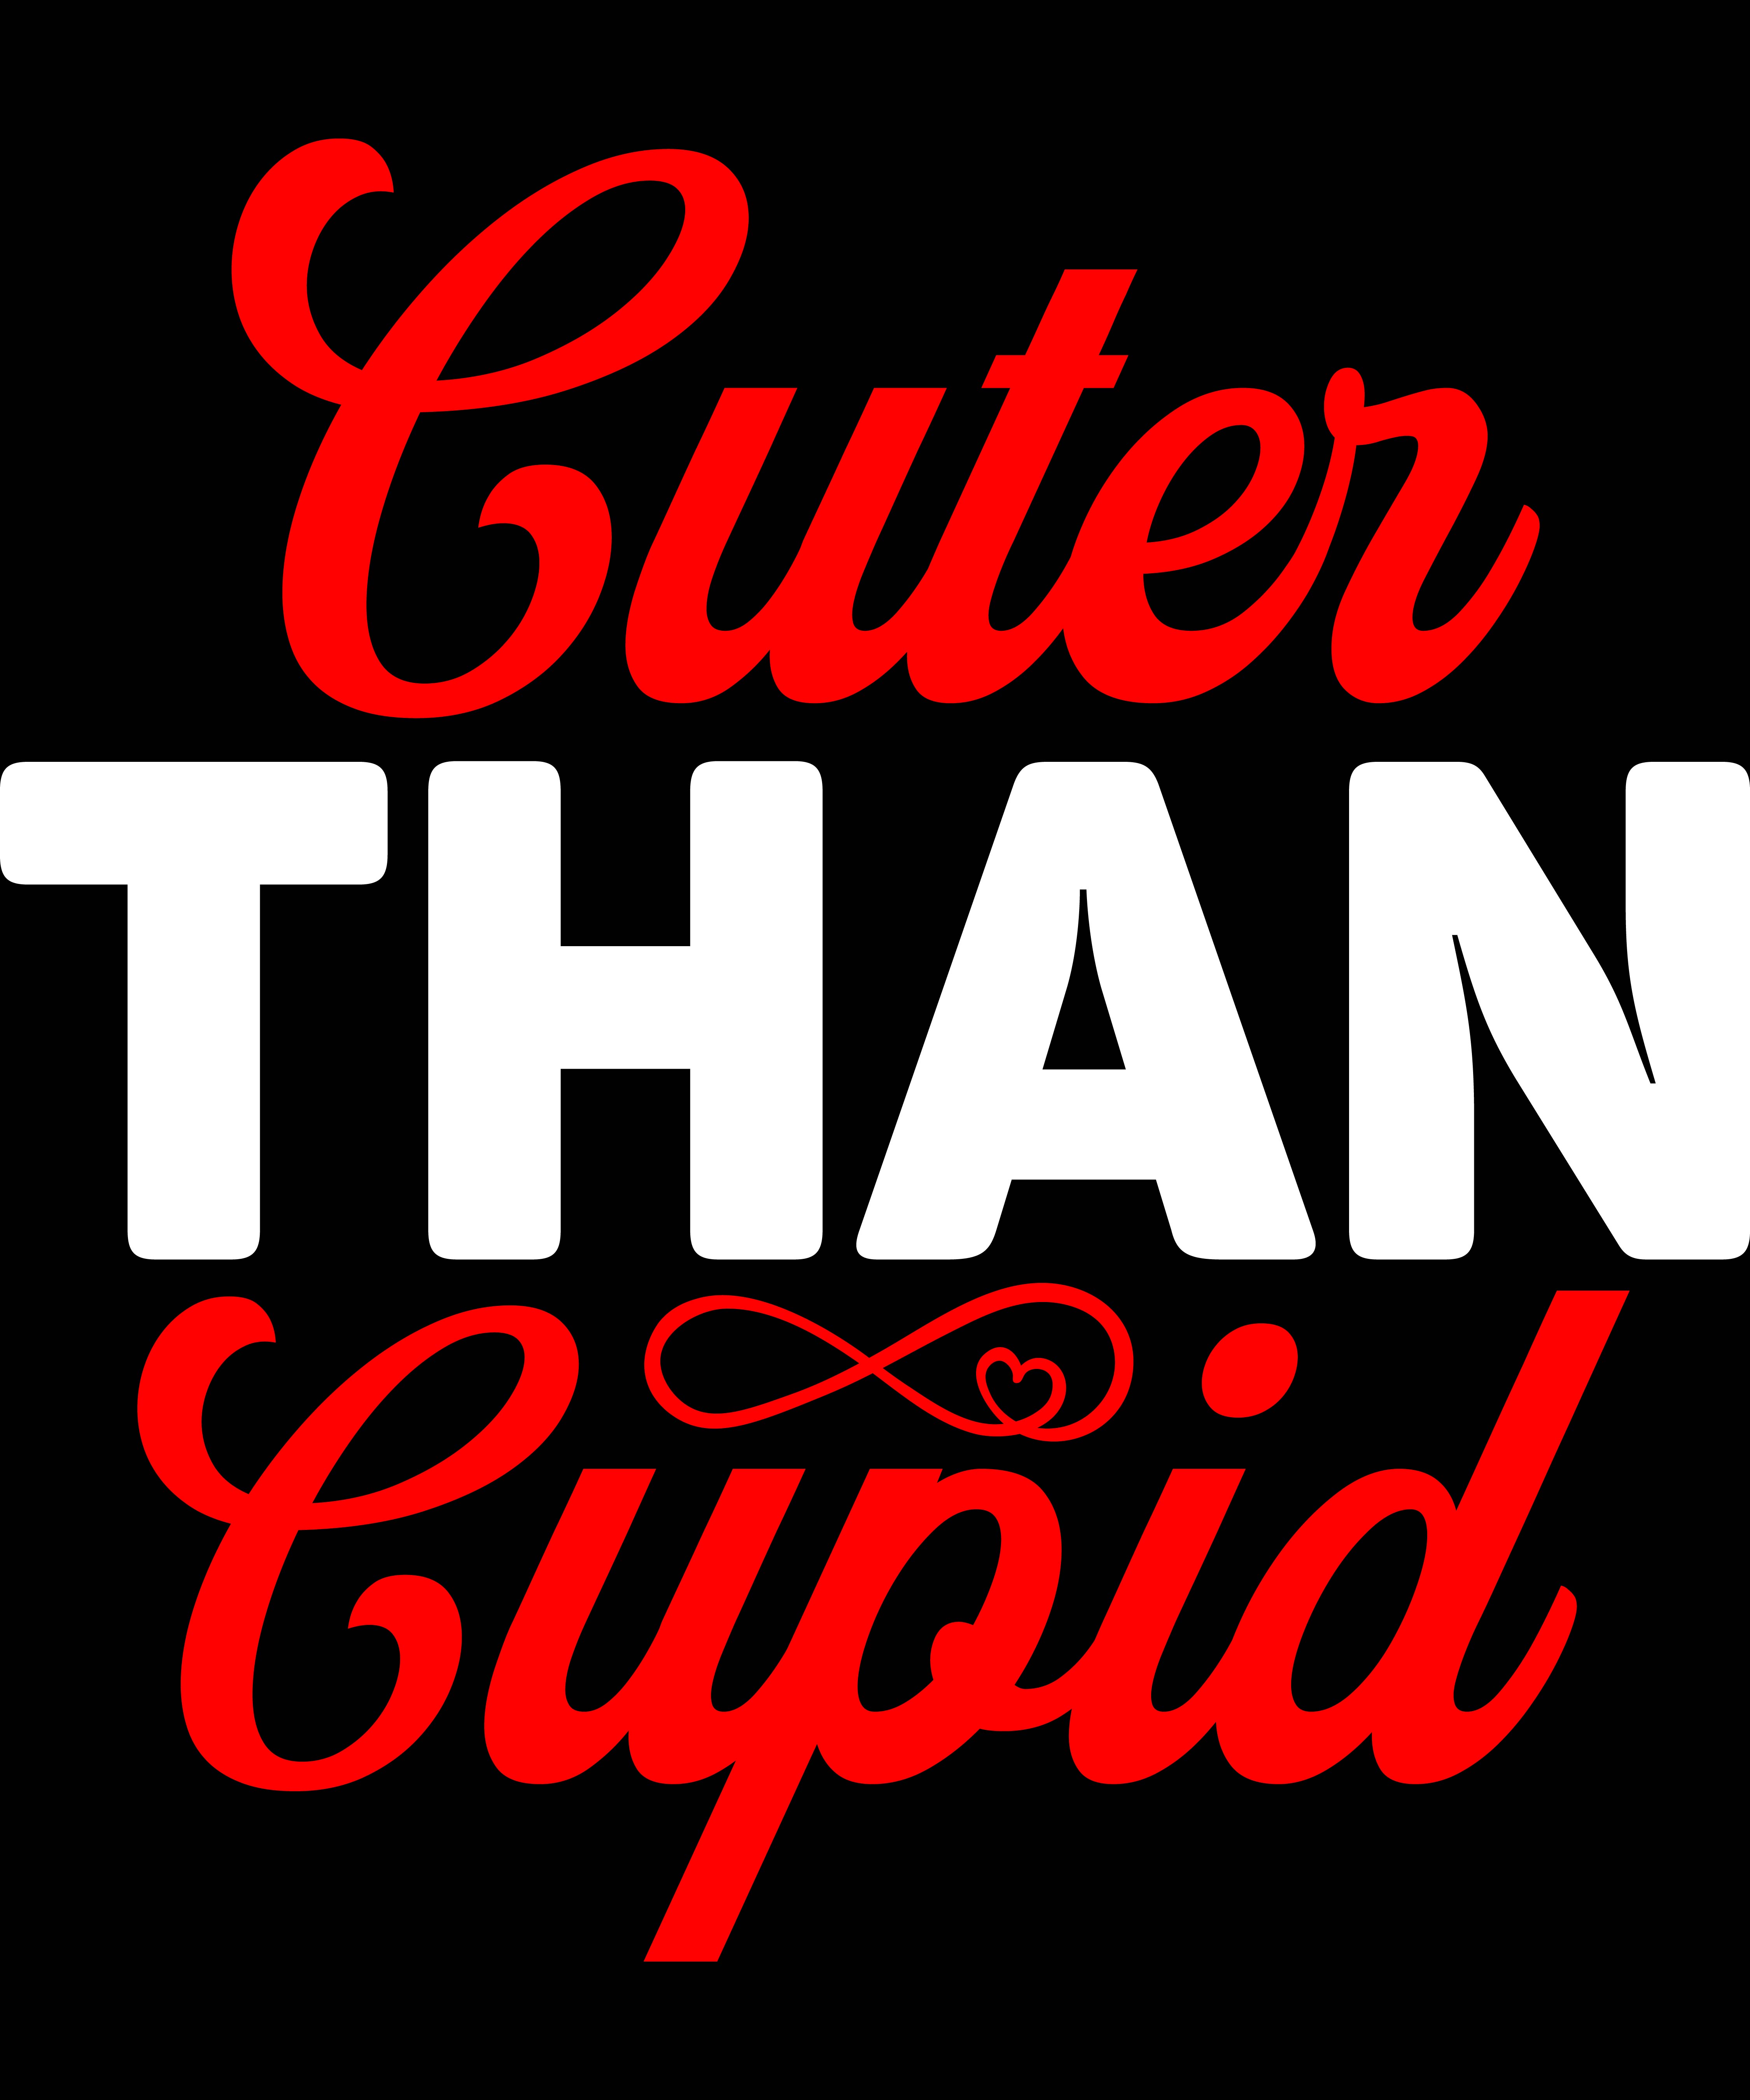 Cuter than cupid - quote for t-shirt design.